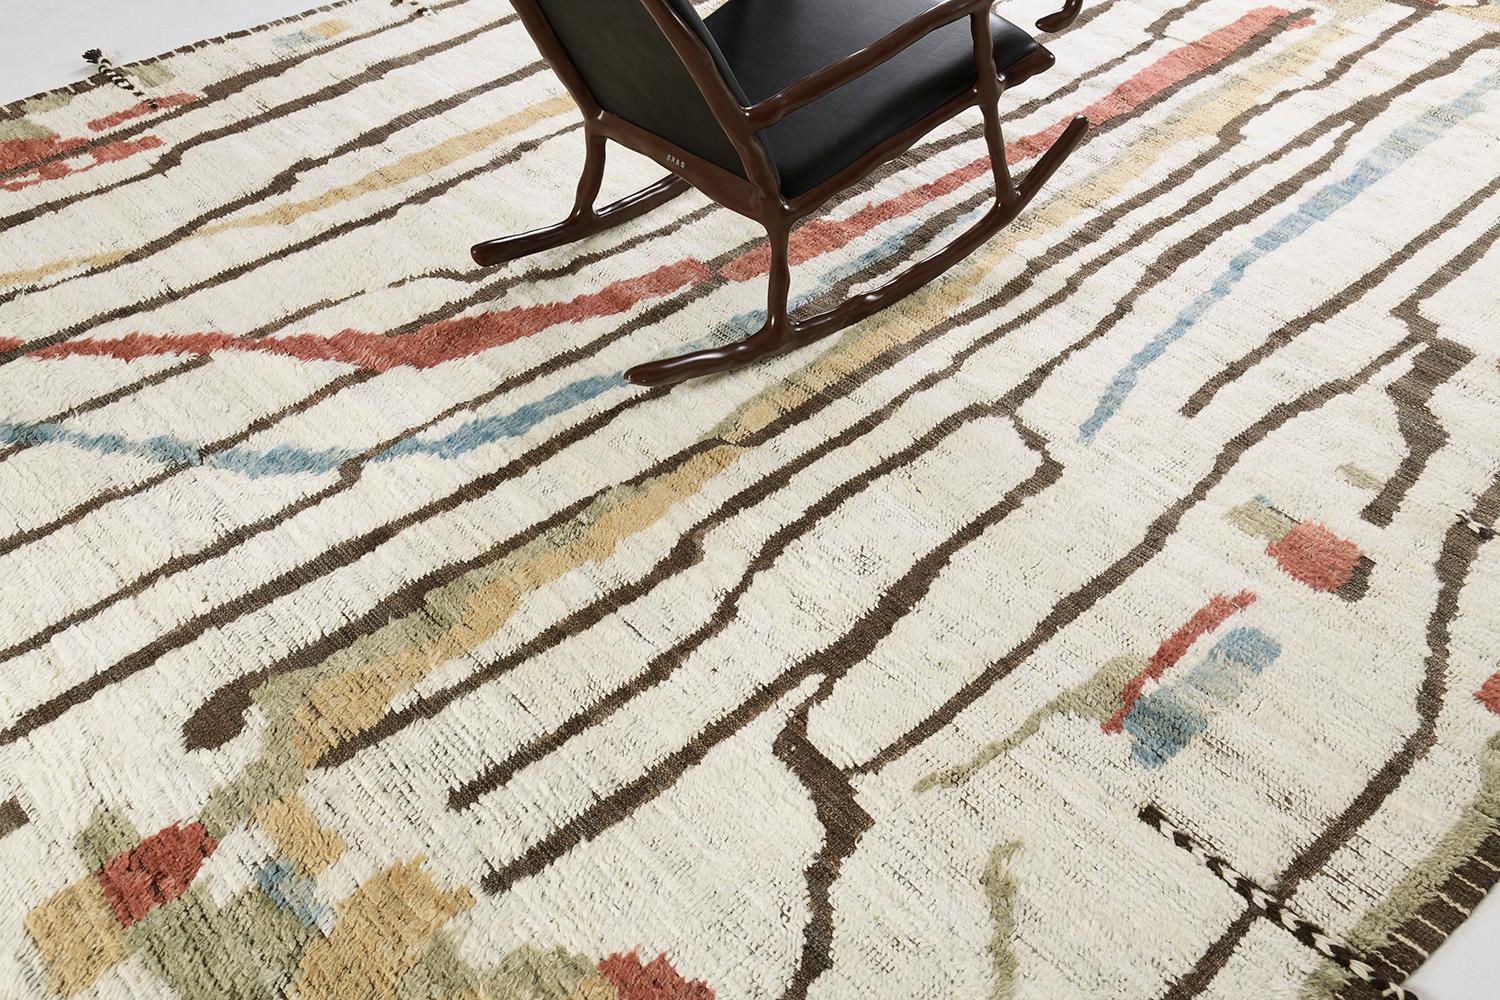 Berberis is an interplay between natural, red, and gold tones into a modern-day interpretation of the Moroccan world. This rug's play of textures, linework, and simplicity is what makes the Atlas Collection so unique and sought after. Mehraban's